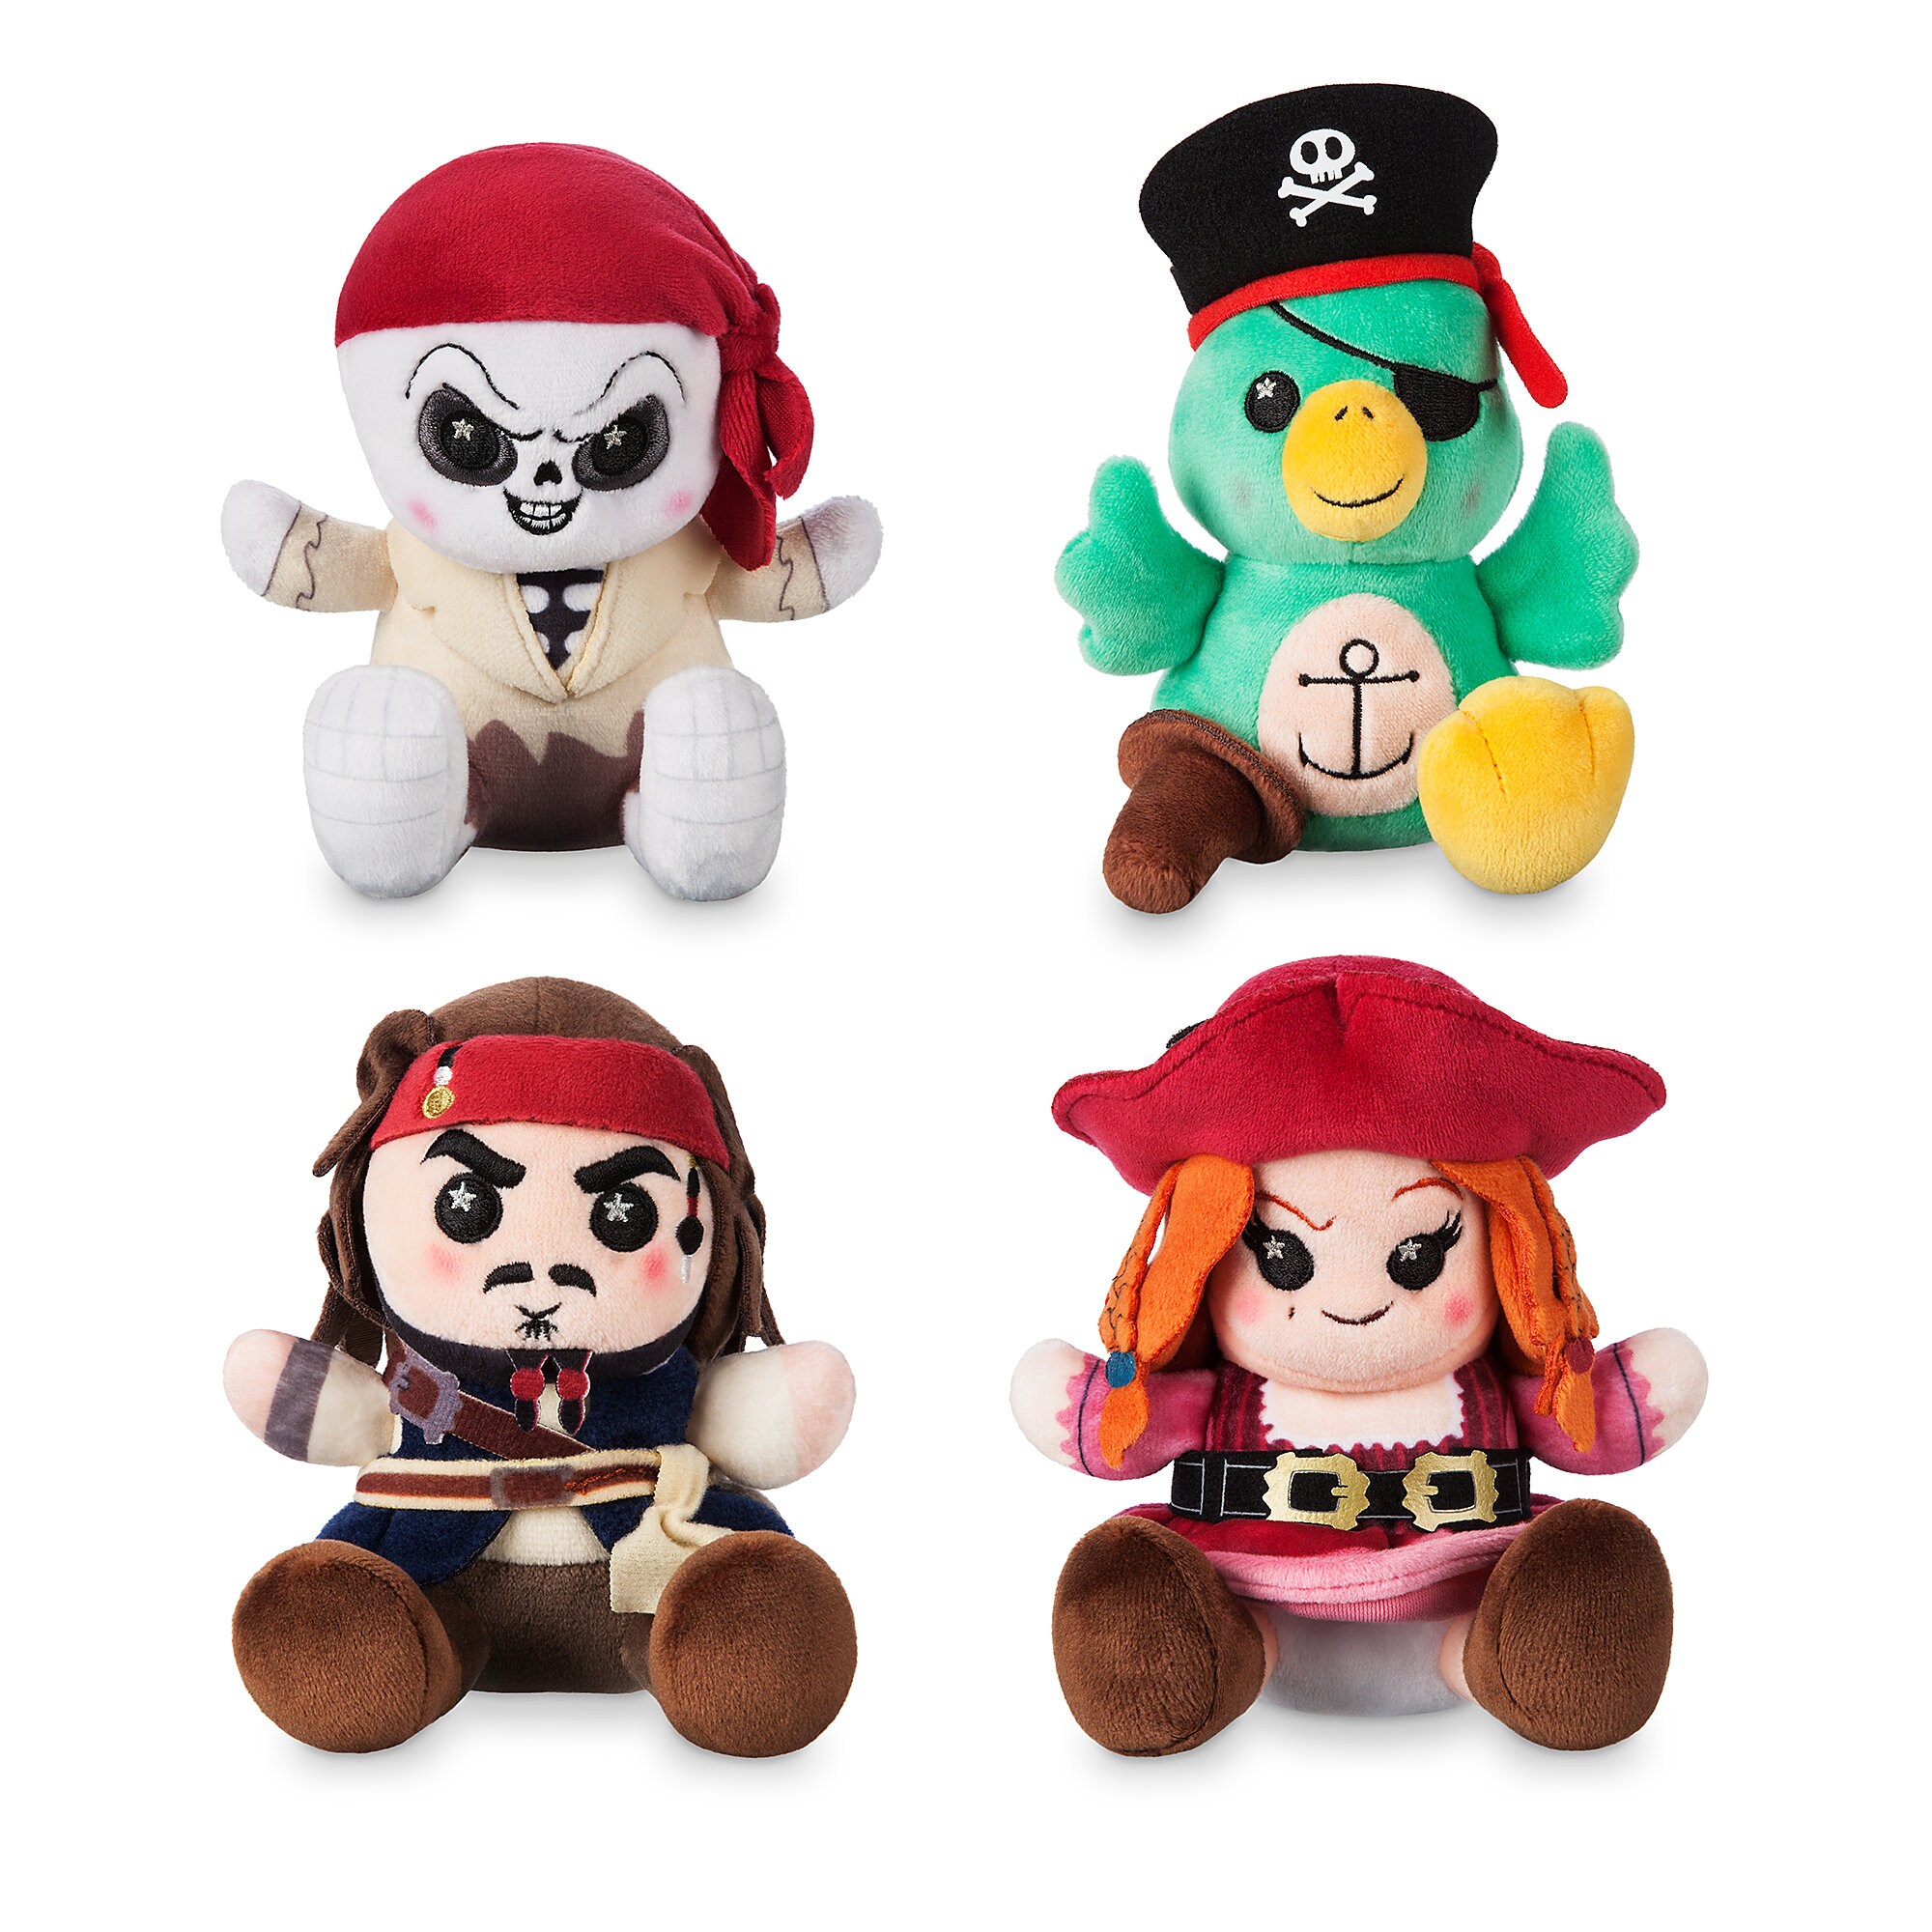 Disney Parks Wishables Mystery Plush - Pirates of the Caribbean Attraction Series